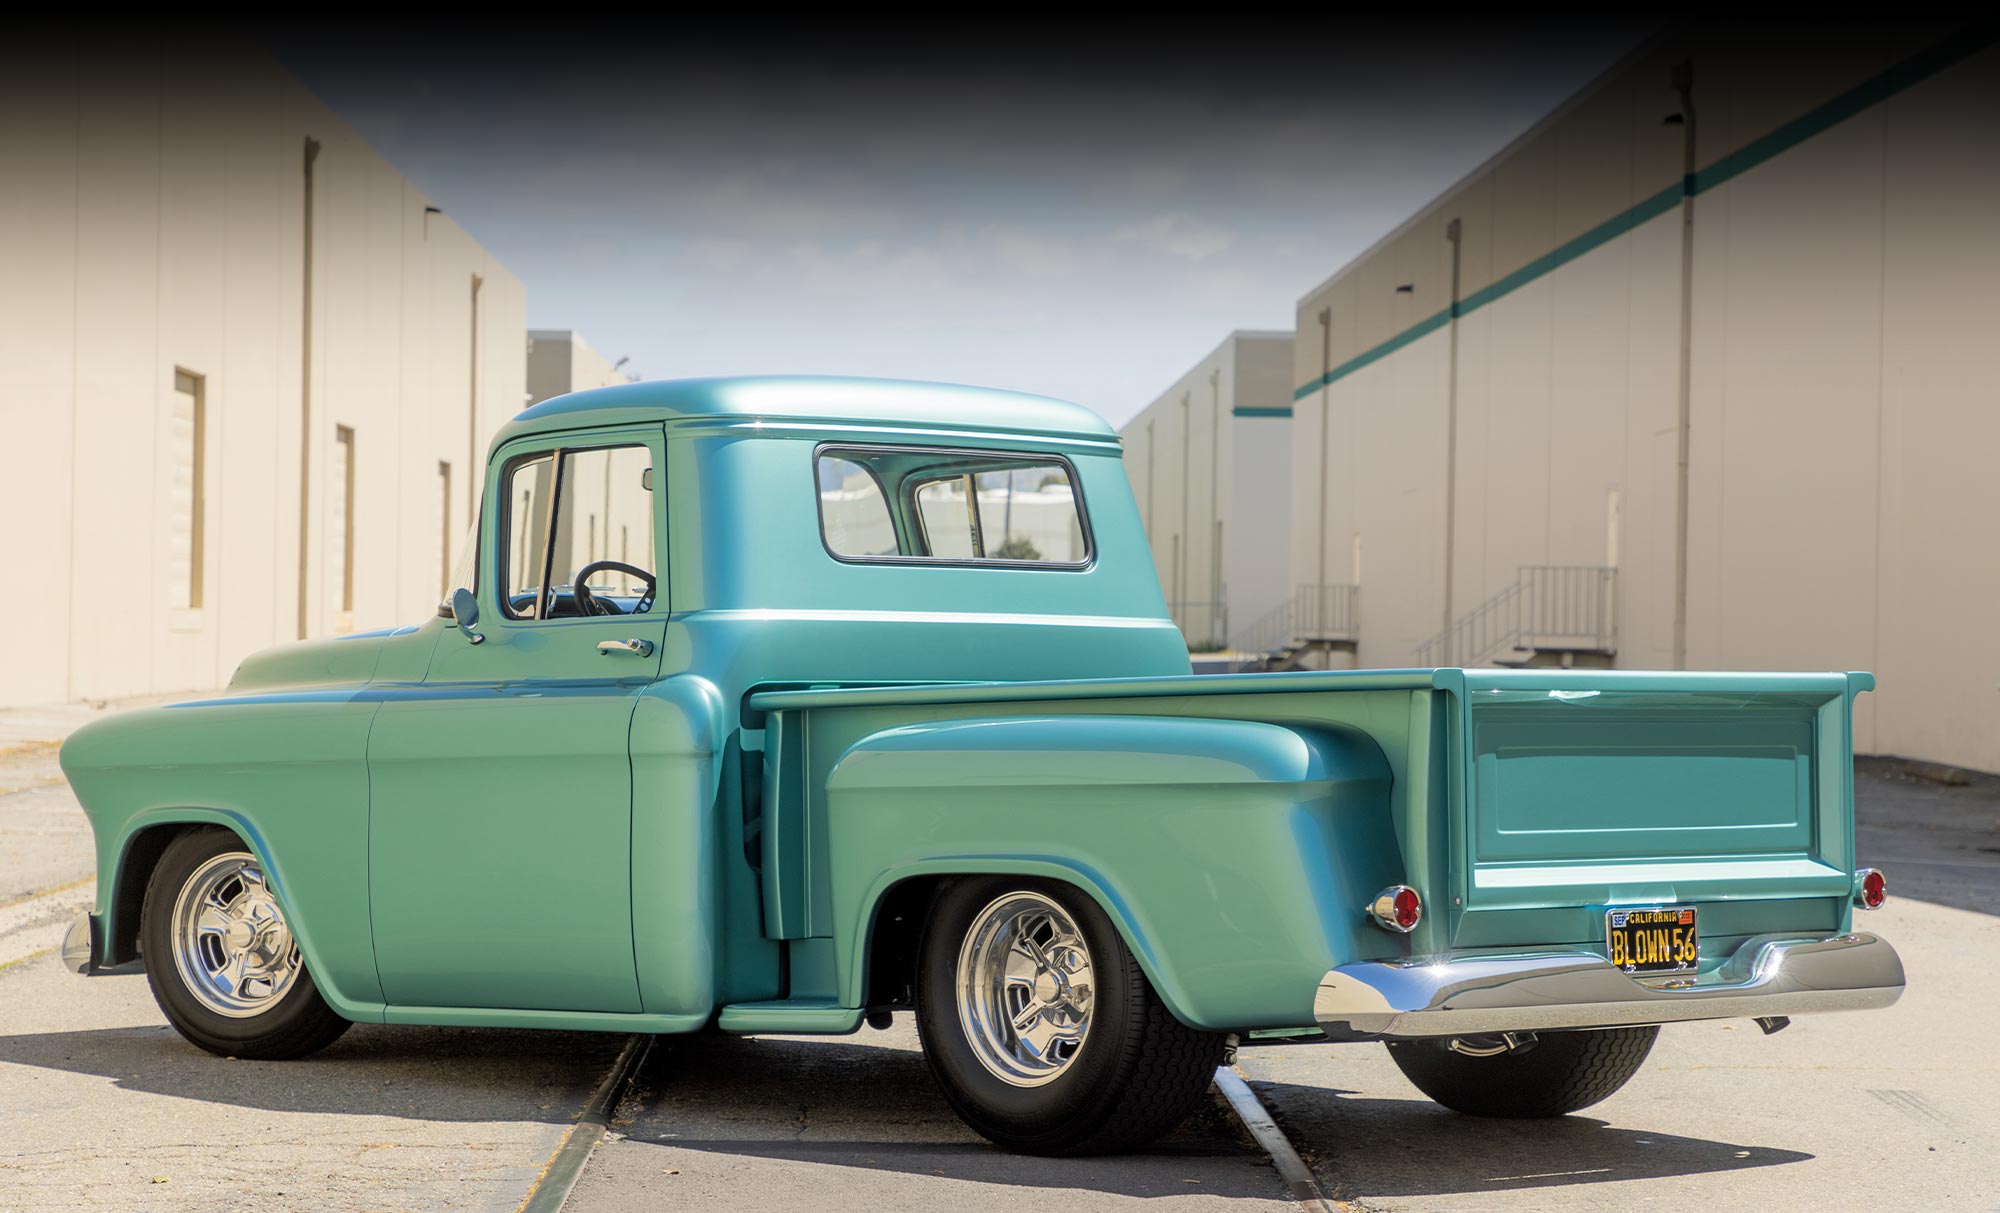 driver side quarter rear view of the sea green ’56 Chevy truck